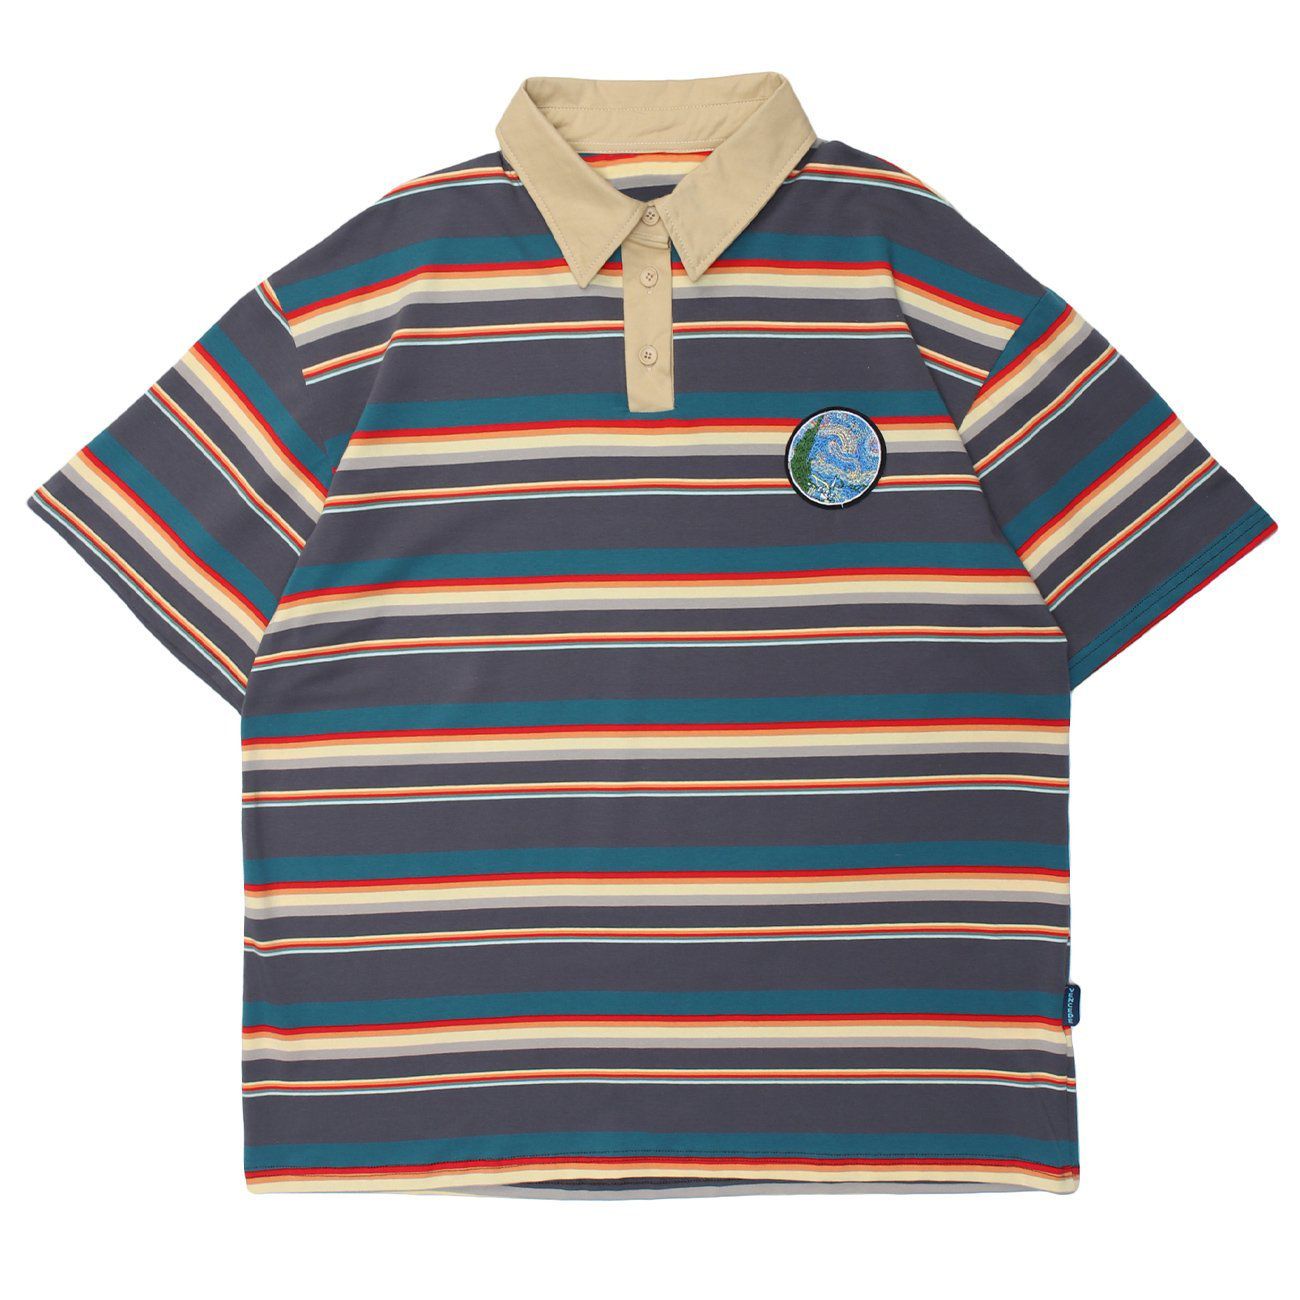 Printed Stripes Breathable Cotton Polo T-Shirt